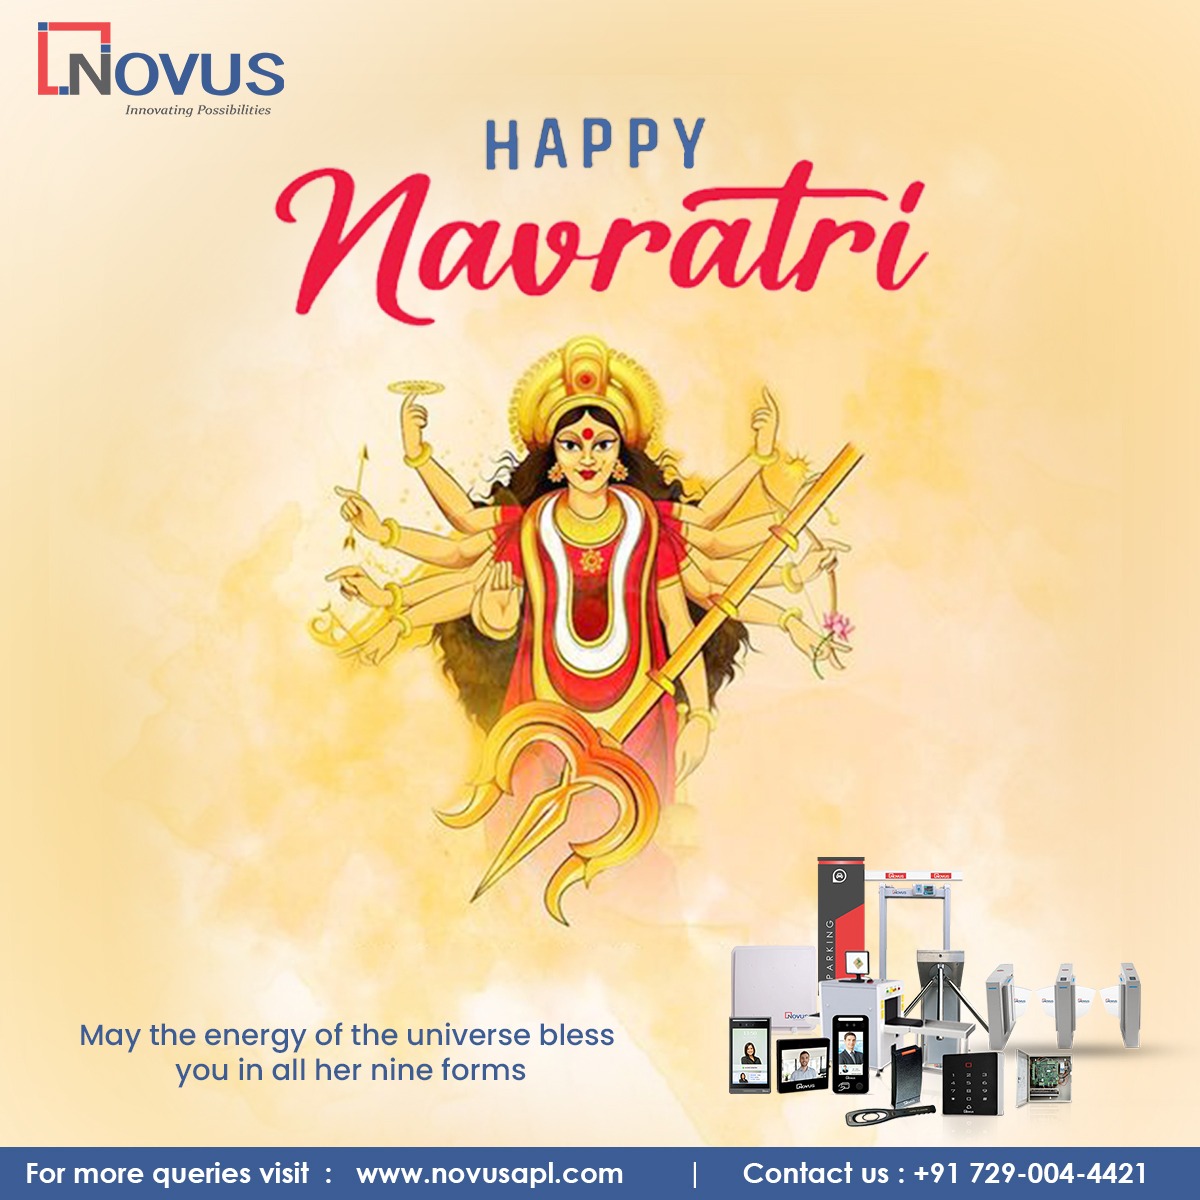 Happy Navratri to you as well! May this auspicious occasion bring joy, prosperity, and good fortune to you and your loved ones. May Goddess Durga bless you with strength,

#SecurityGate #AccessControl #BarrierSystem #TrafficManagement #ParkingSolution #EntranceSecurity